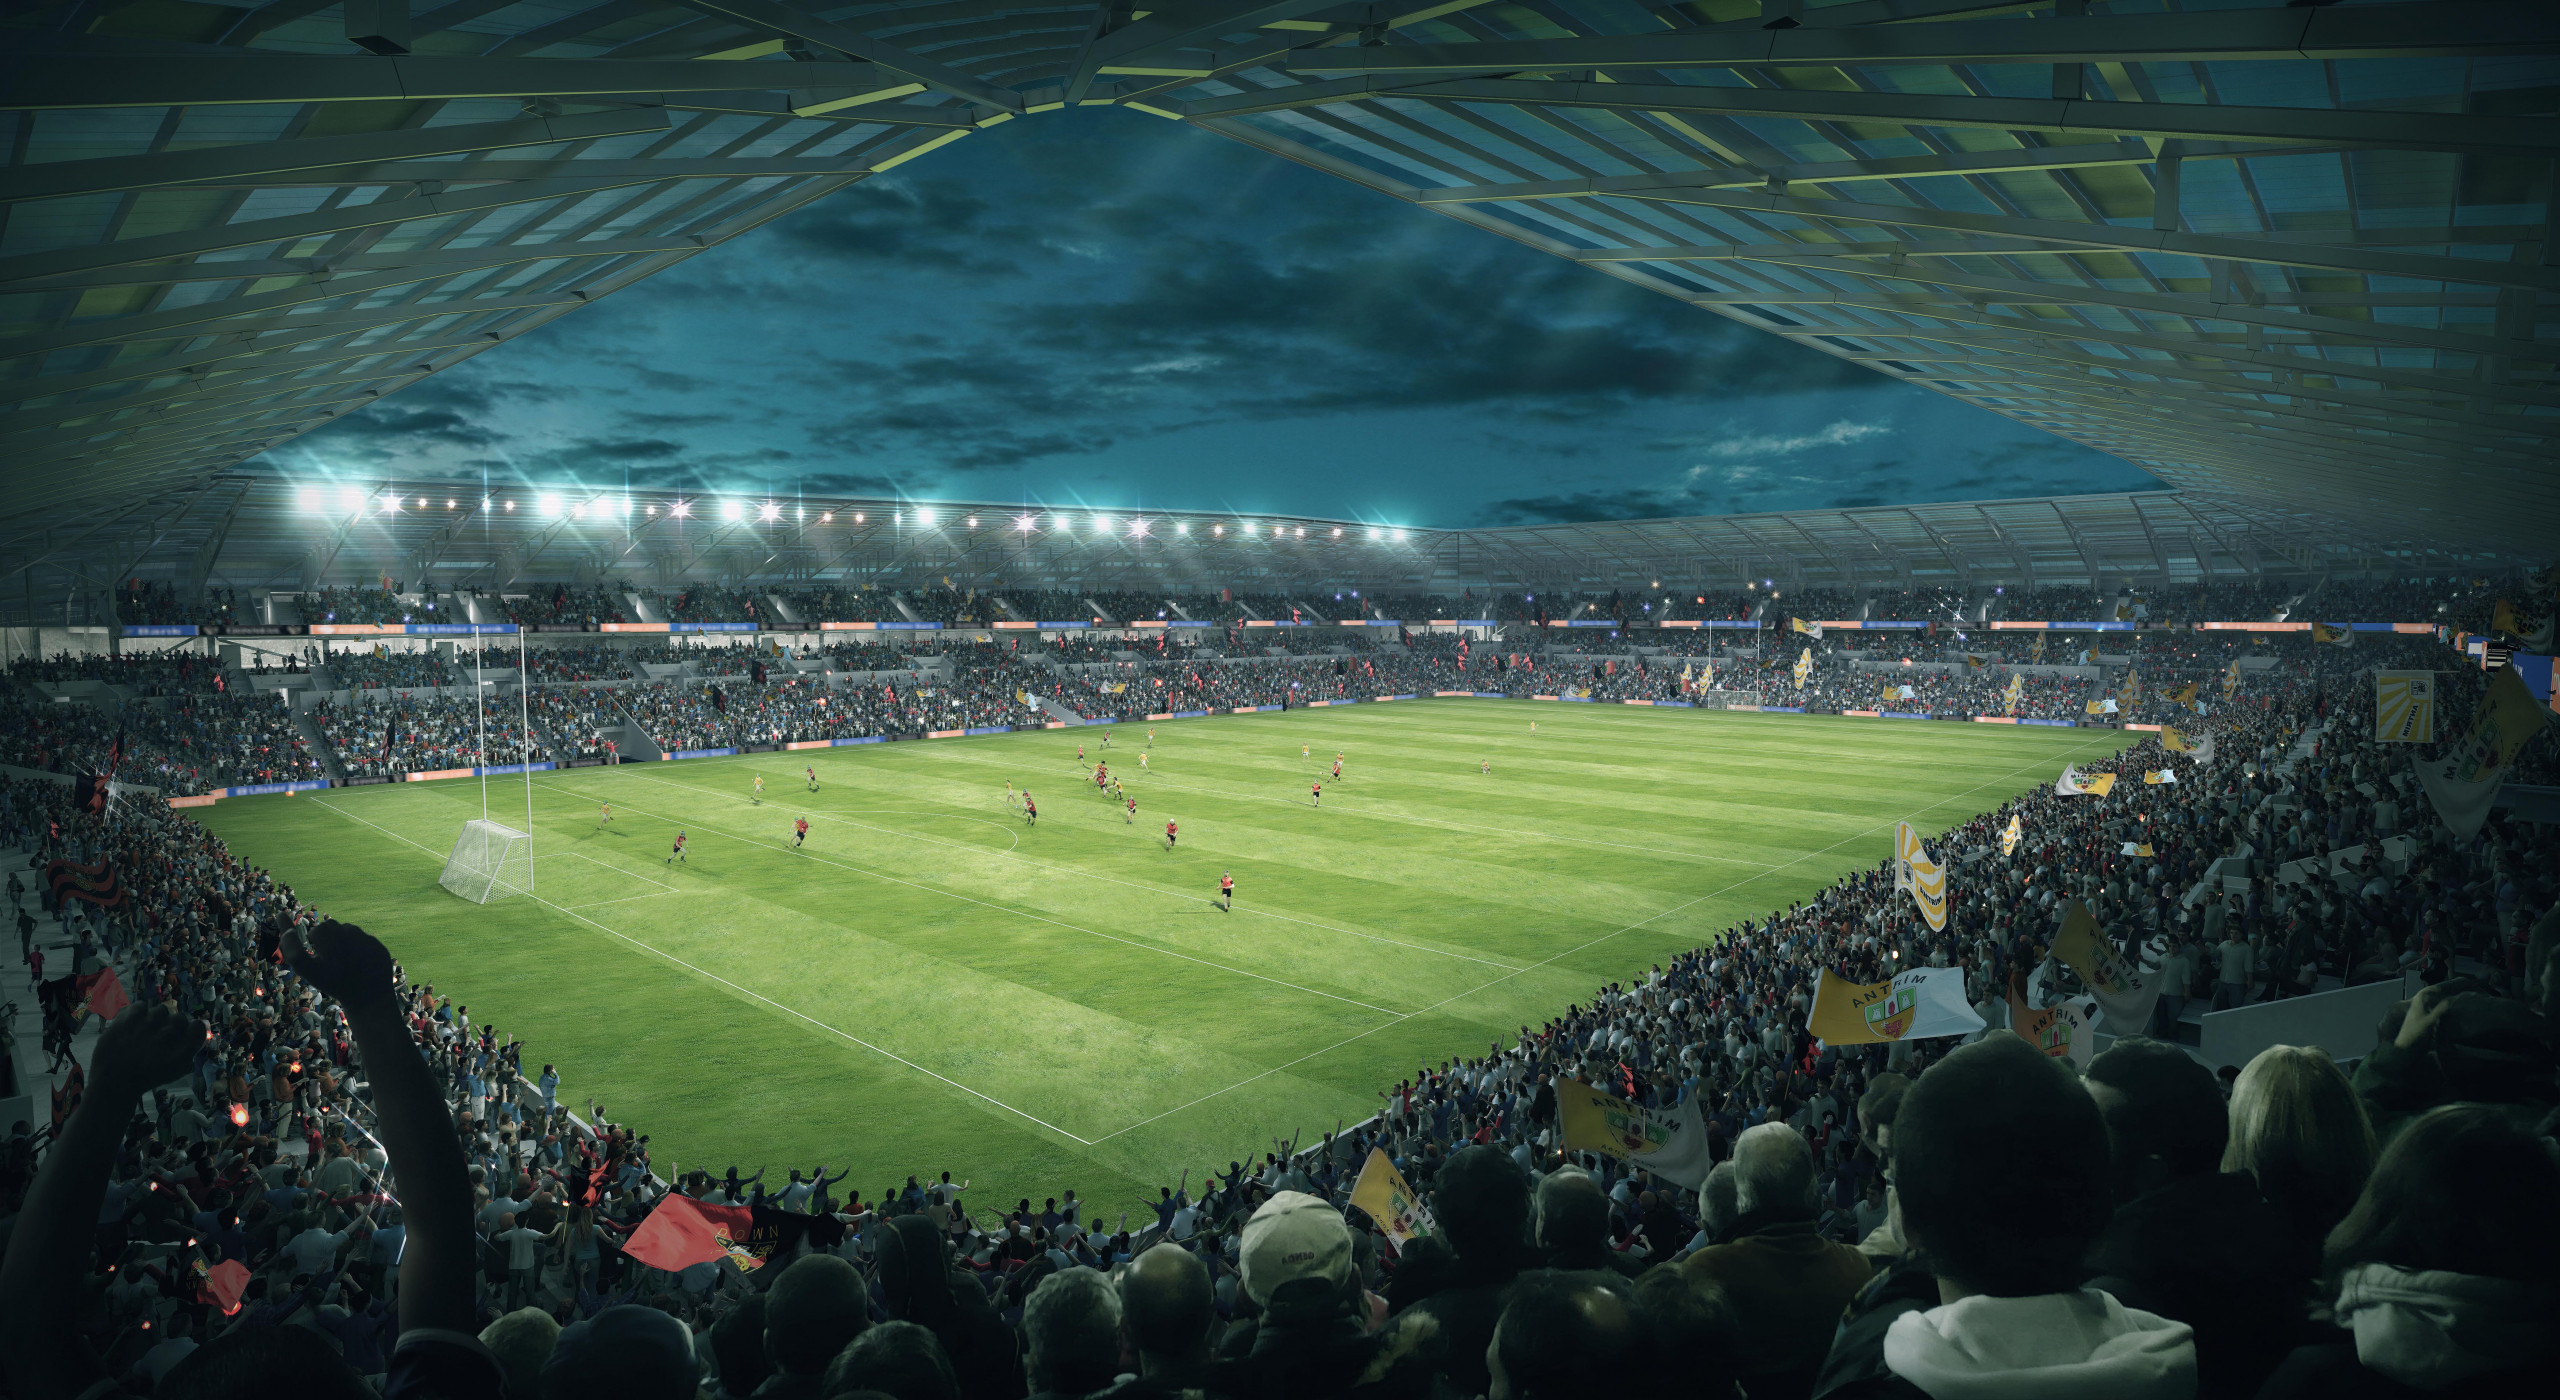 Momentous occasion for Gaels following Casement Park planning confirmation